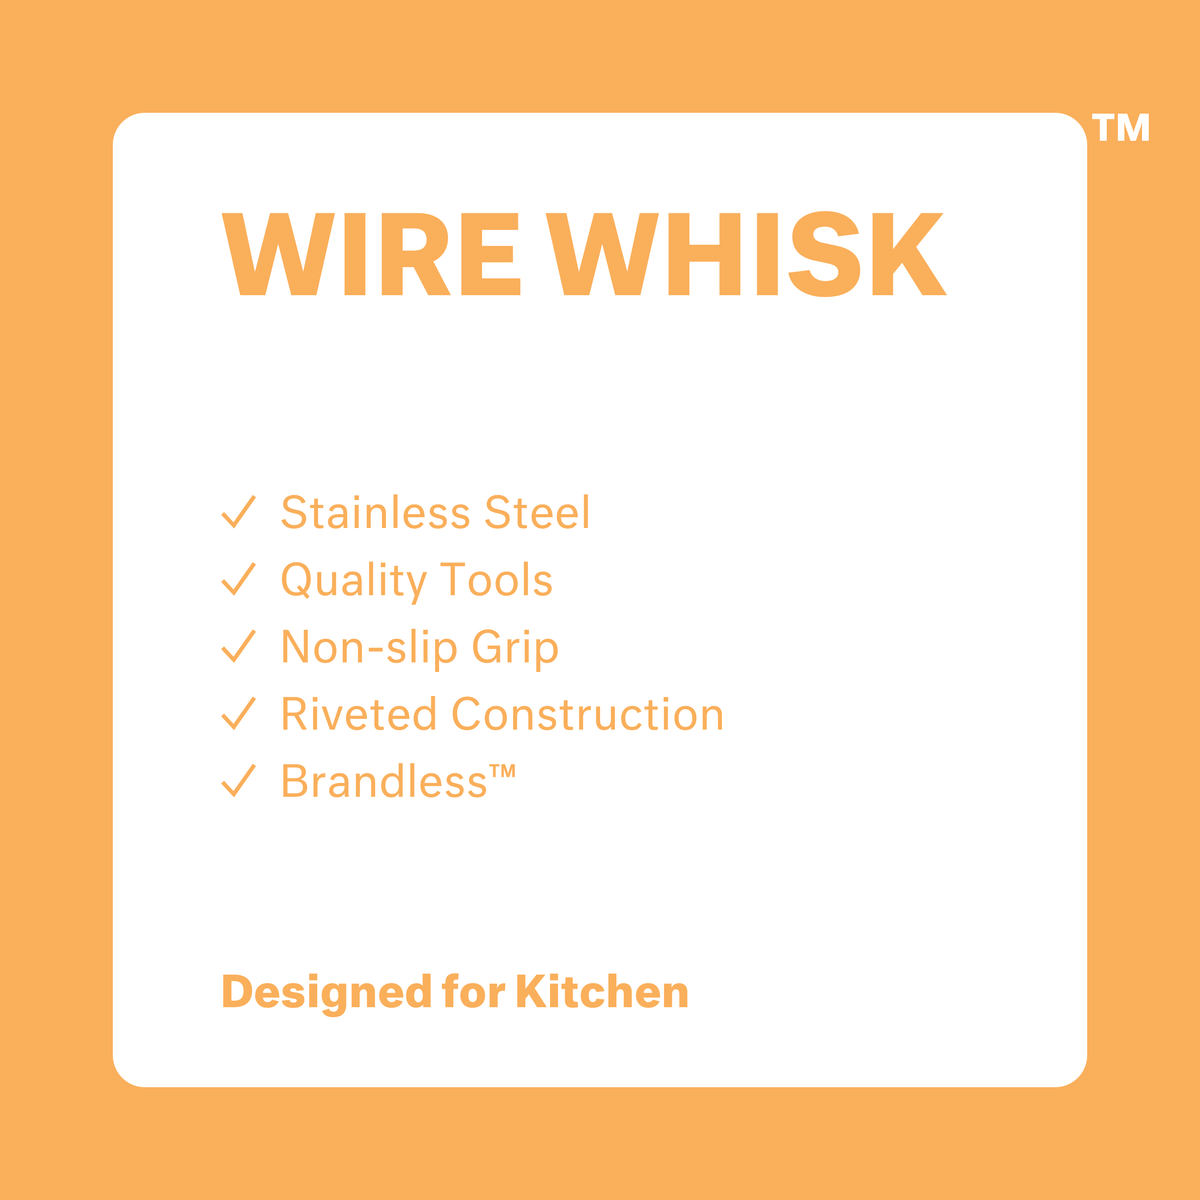 Wire Whisk: stainless steel, quality tools, non-slip grip, riveted construction. brandless. designed for kitchen.